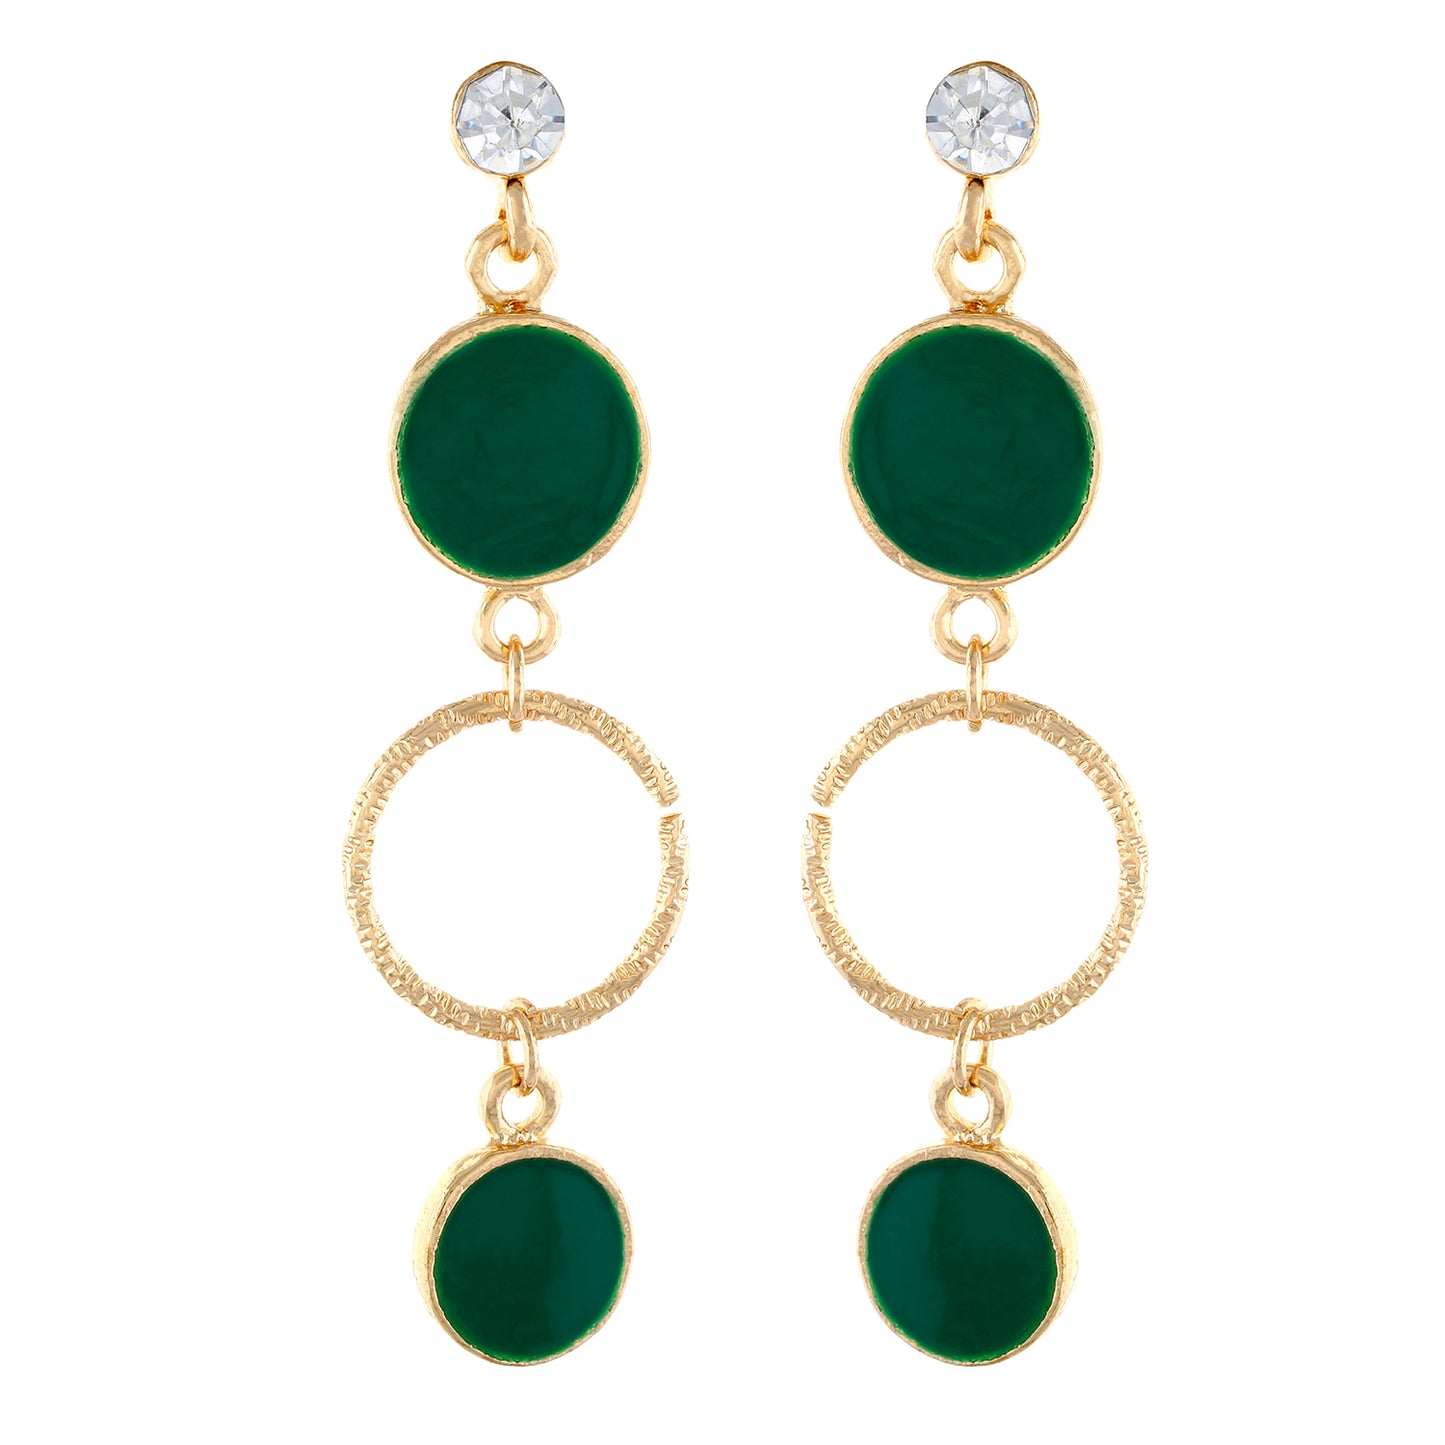 Green colour Round Design Hanging Earrings for Girls and Women